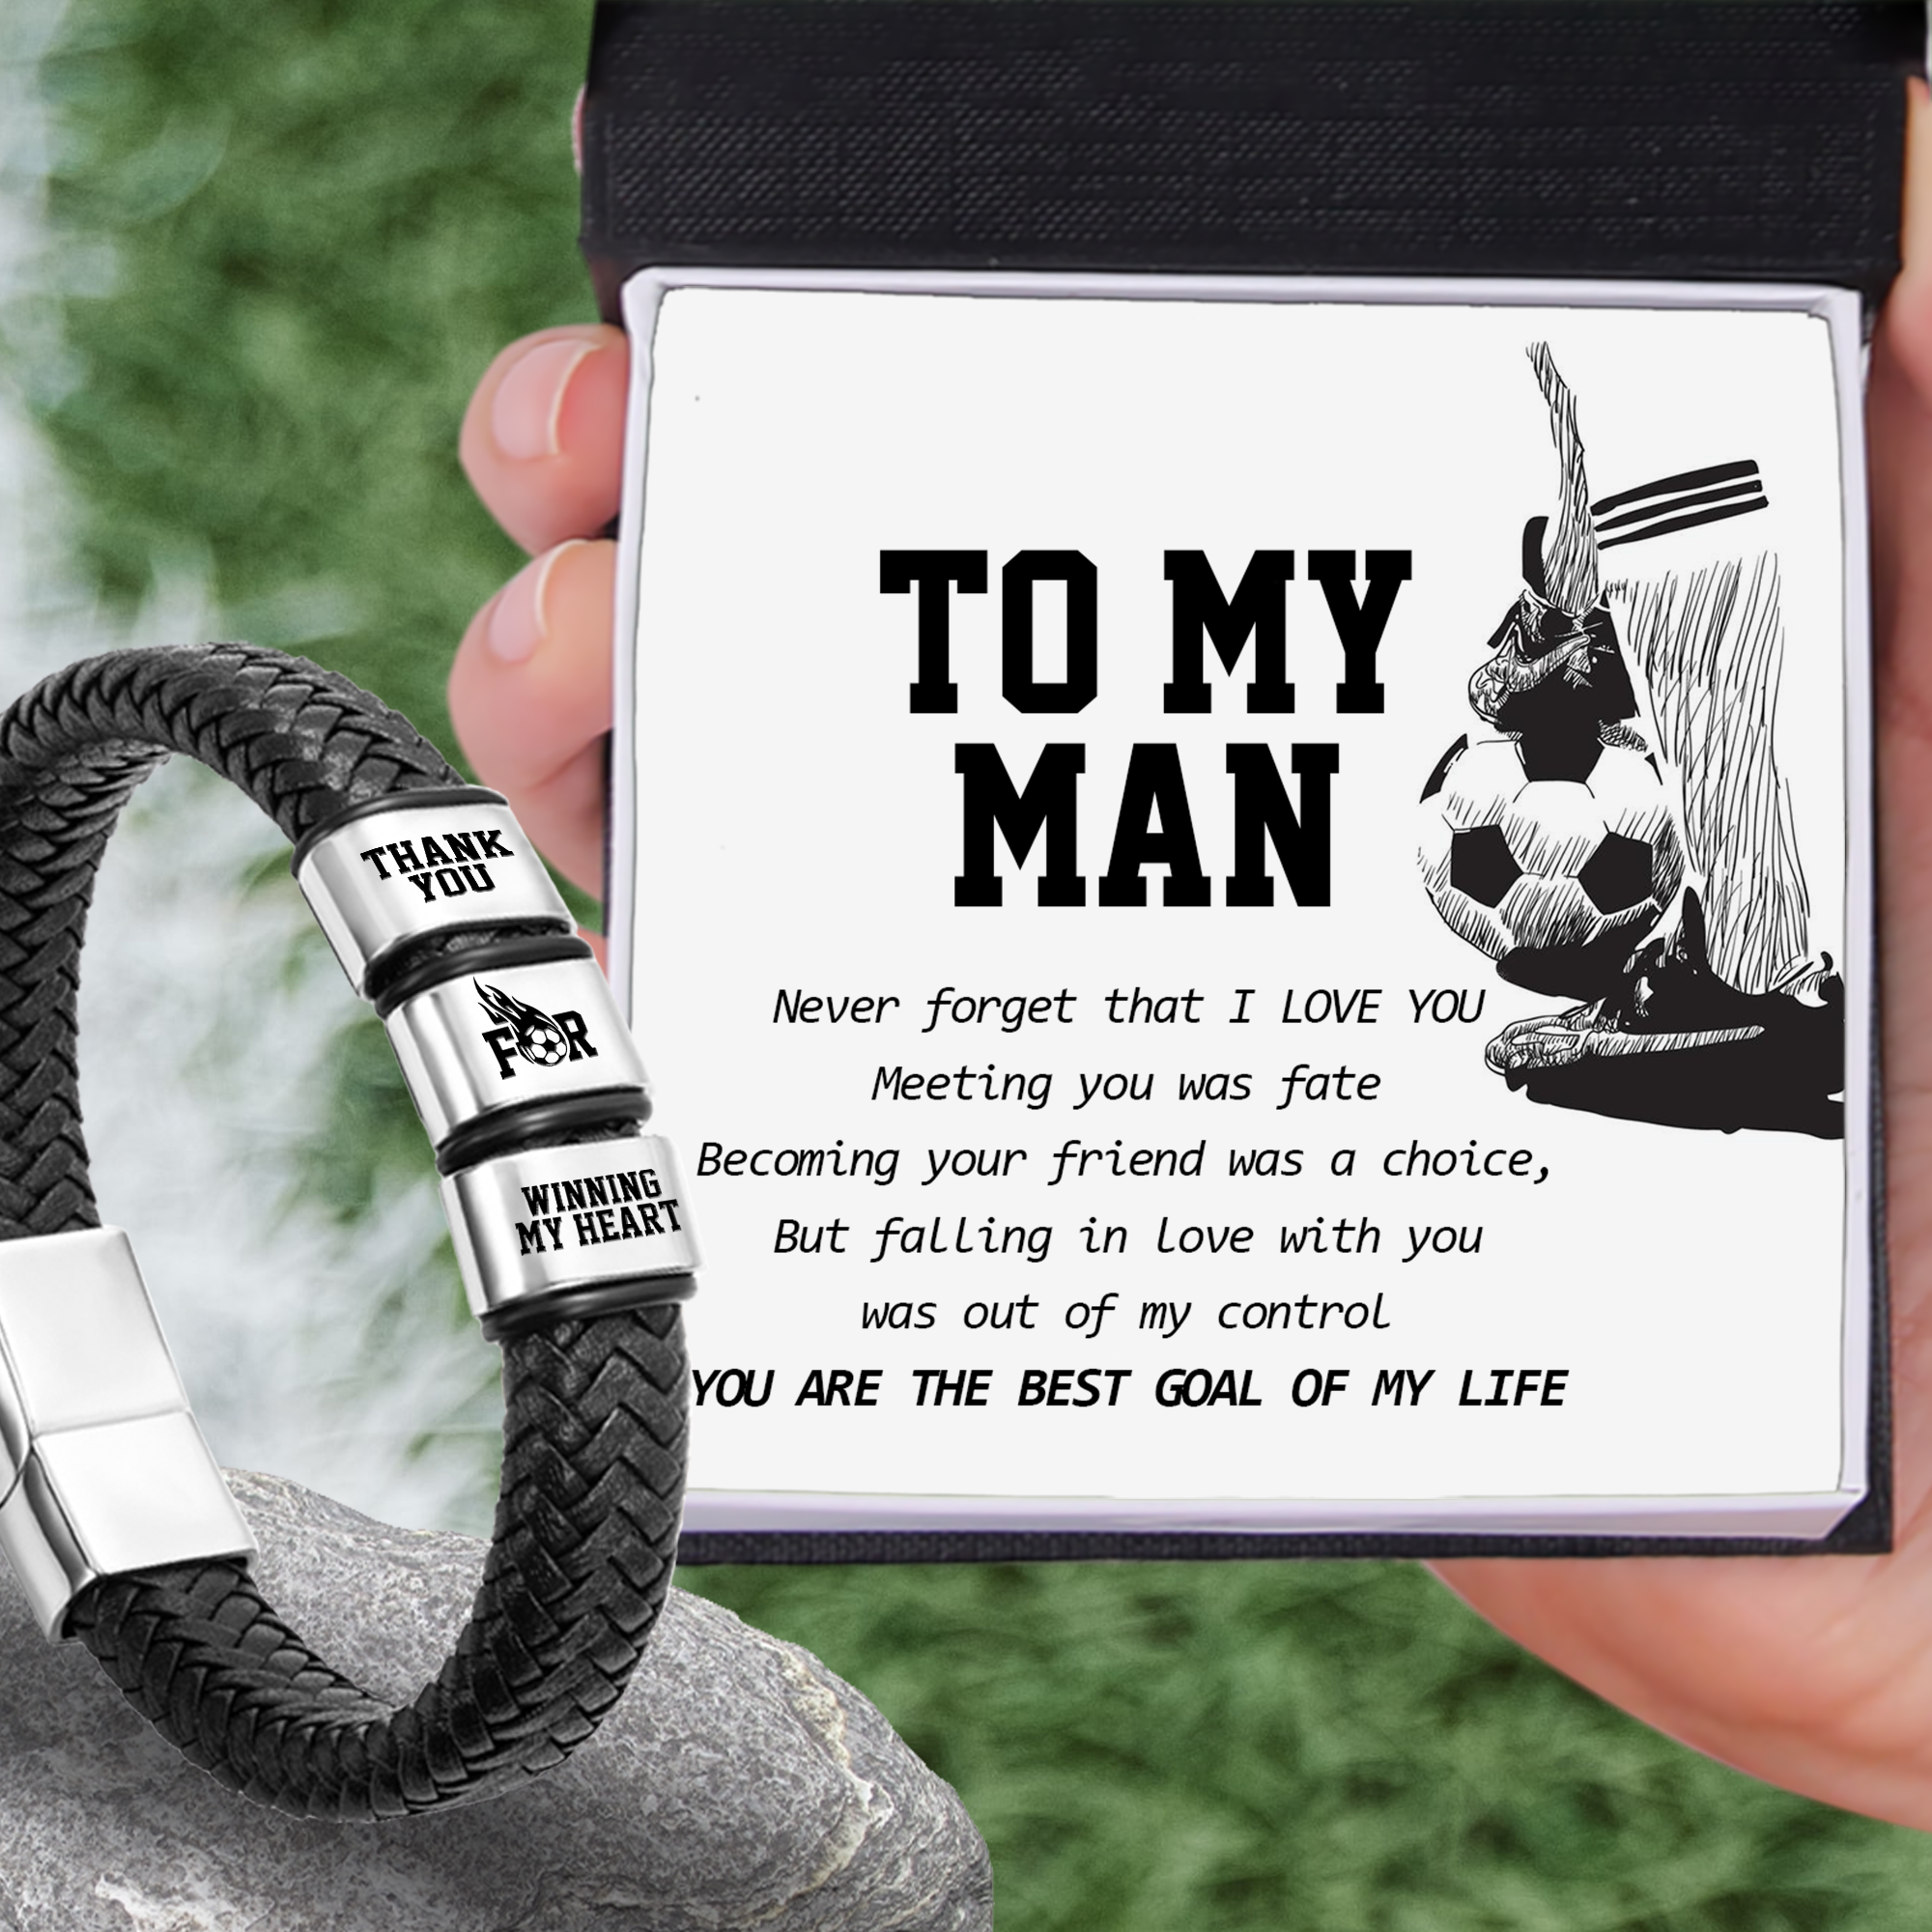 Leather Bracelet - Football - To My Man - Falling In Love With You Was Out Of My Control - Ukgbzl26029